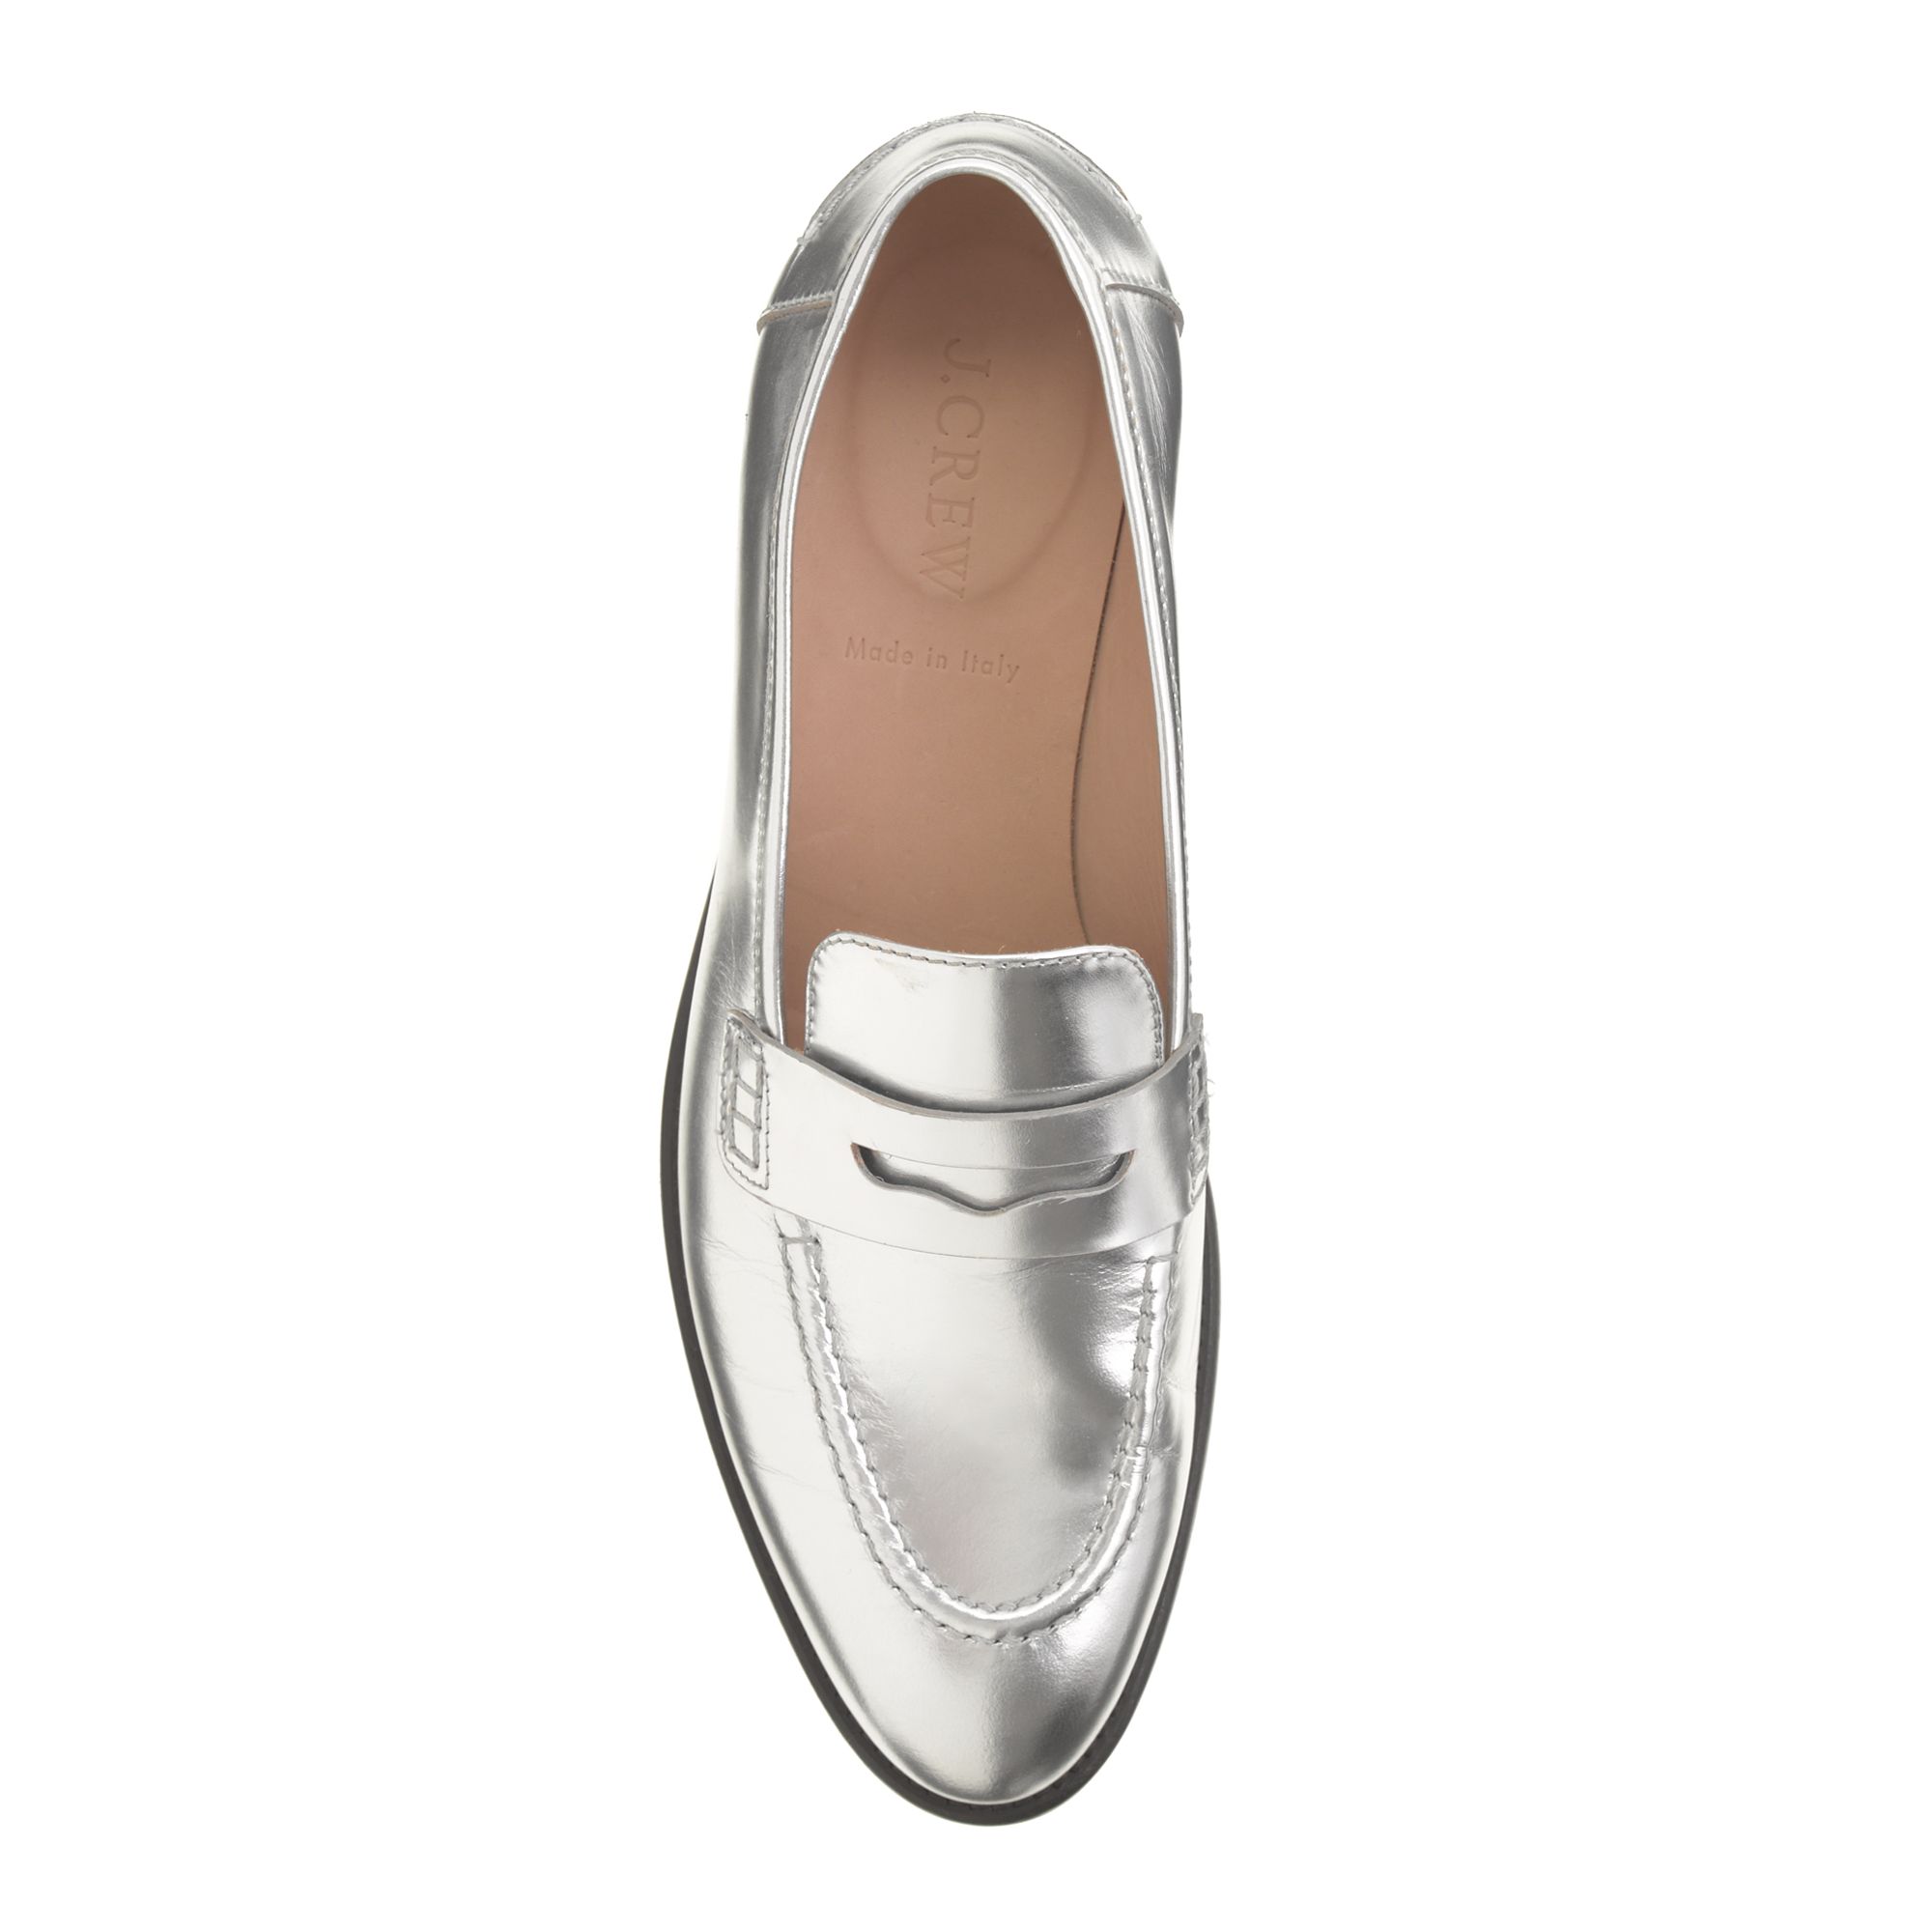 Lyst - J.Crew Preorder Collection Mirror Metallic Penny Loafers in Metallic